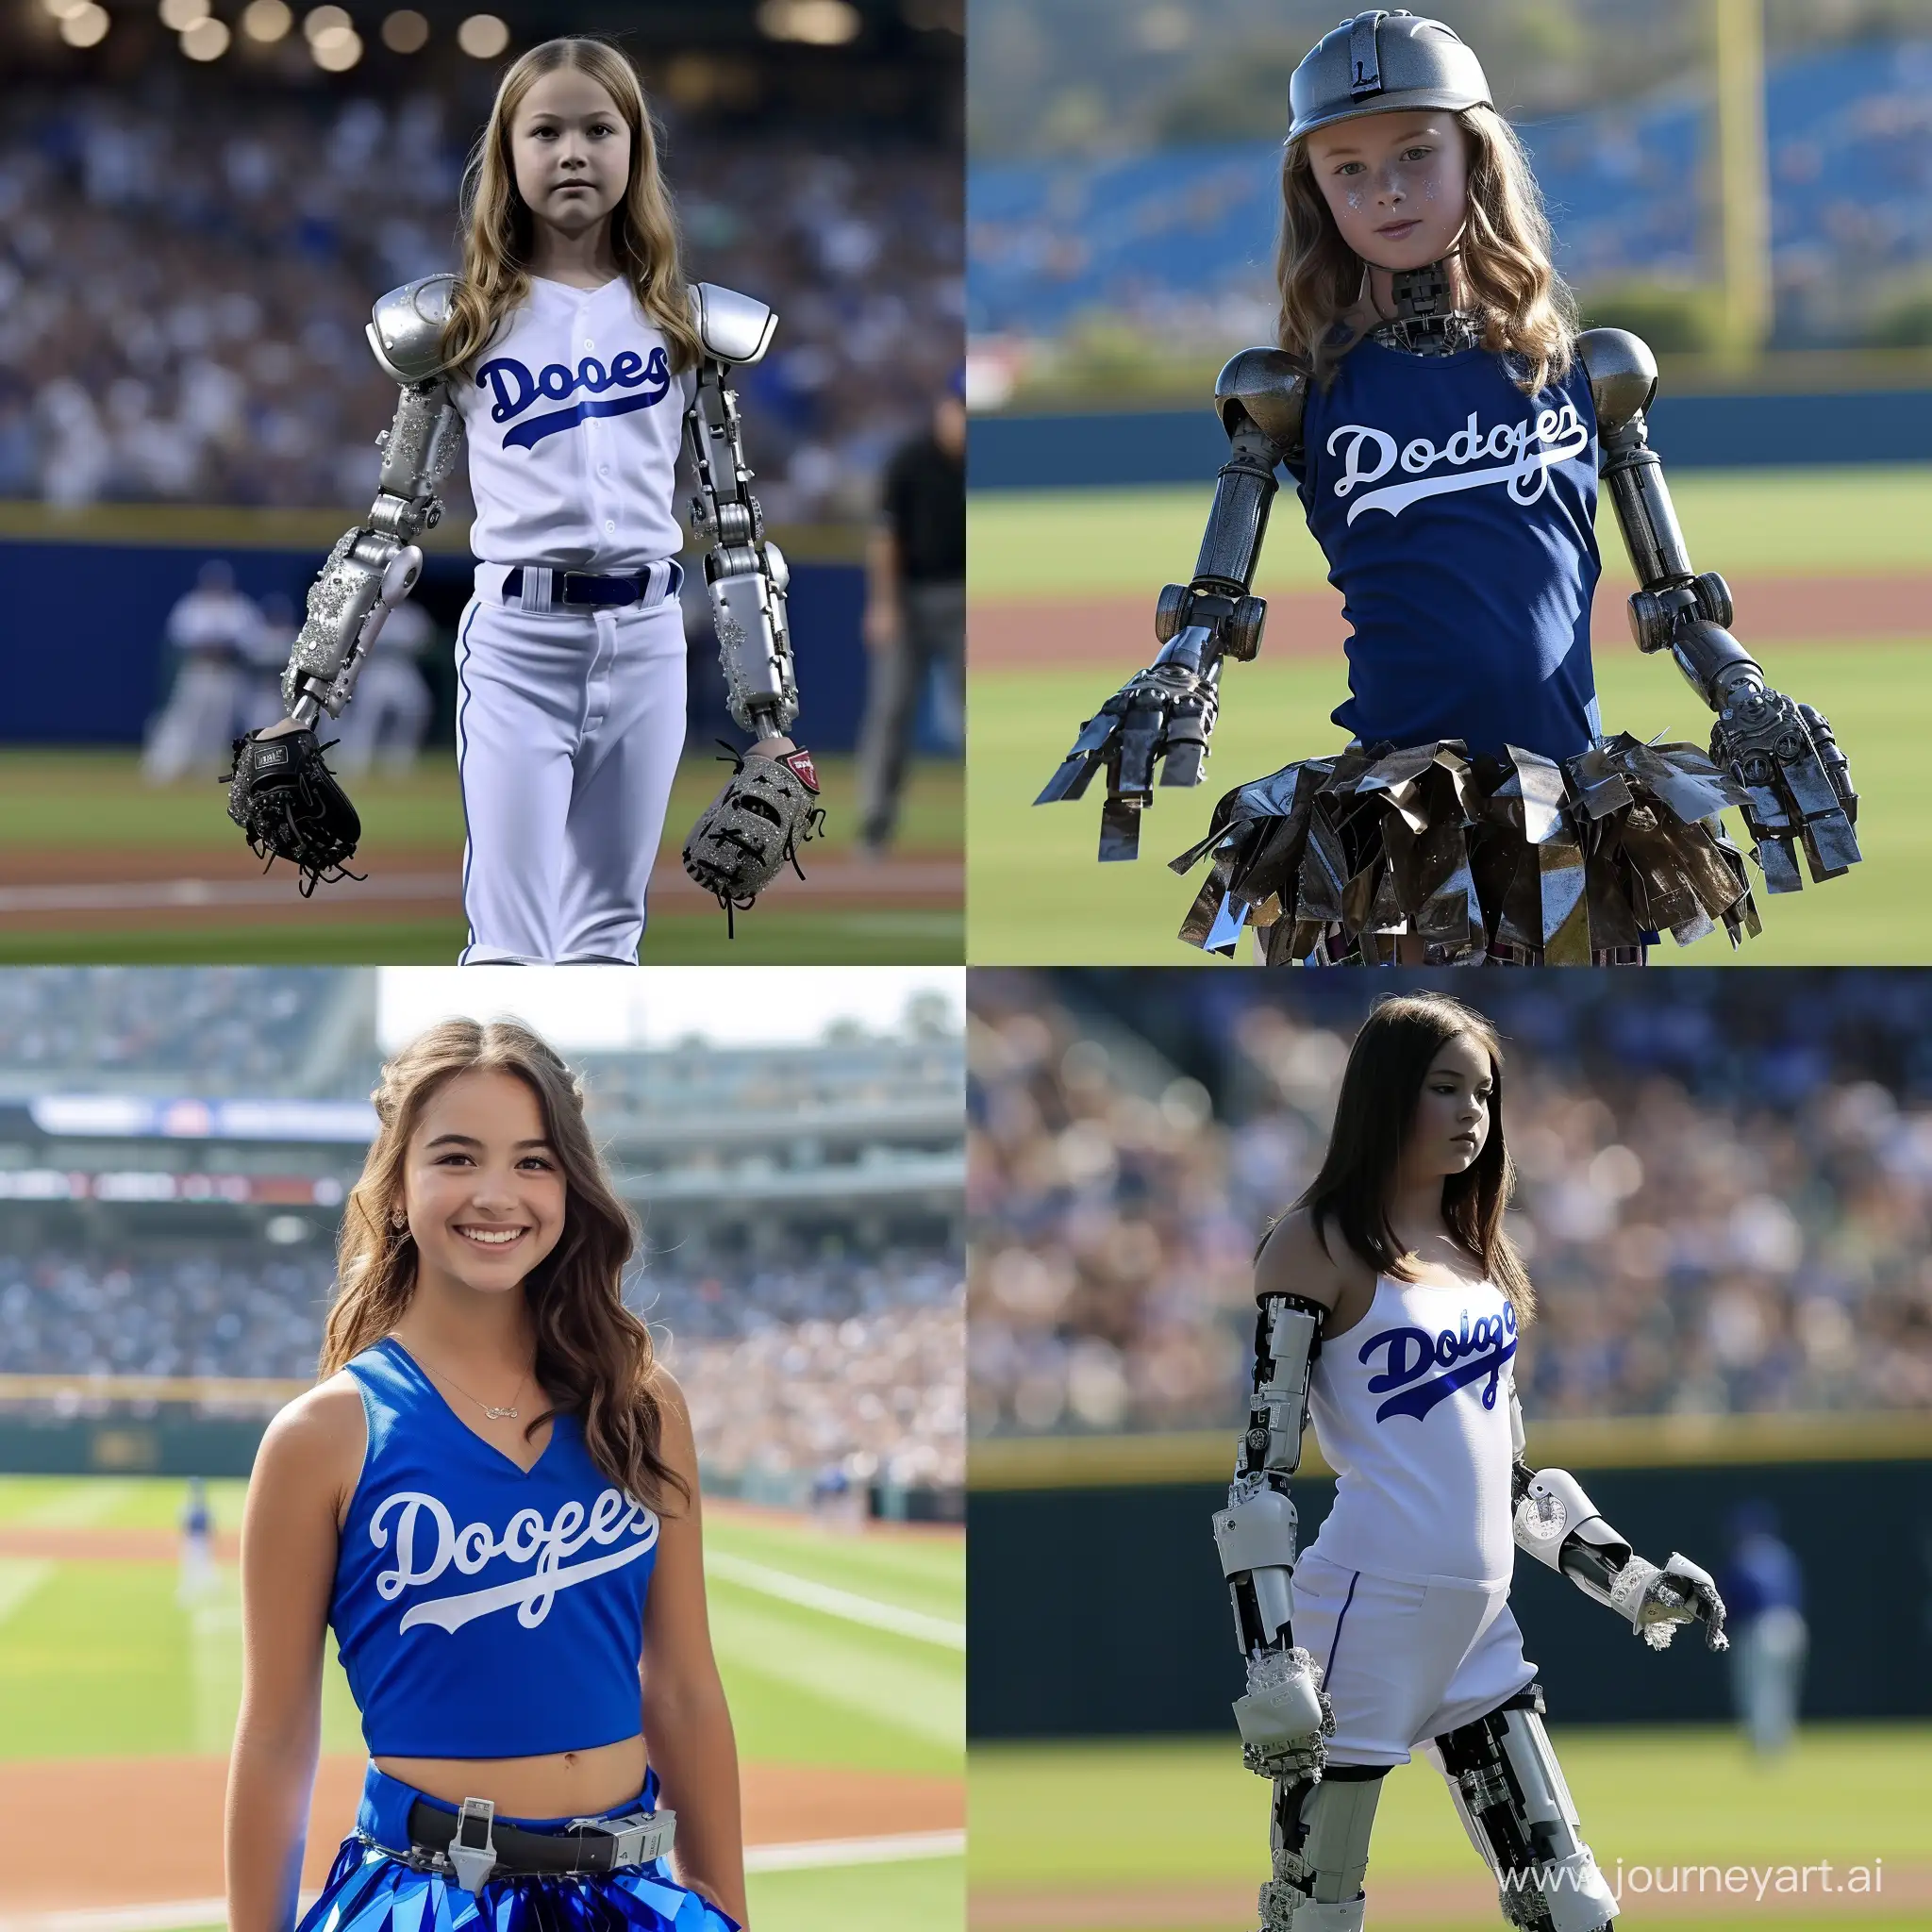 Malfunctioning-Robot-Cheerleader-Unexpected-Twist-at-Los-Angeles-Dodgers-Event